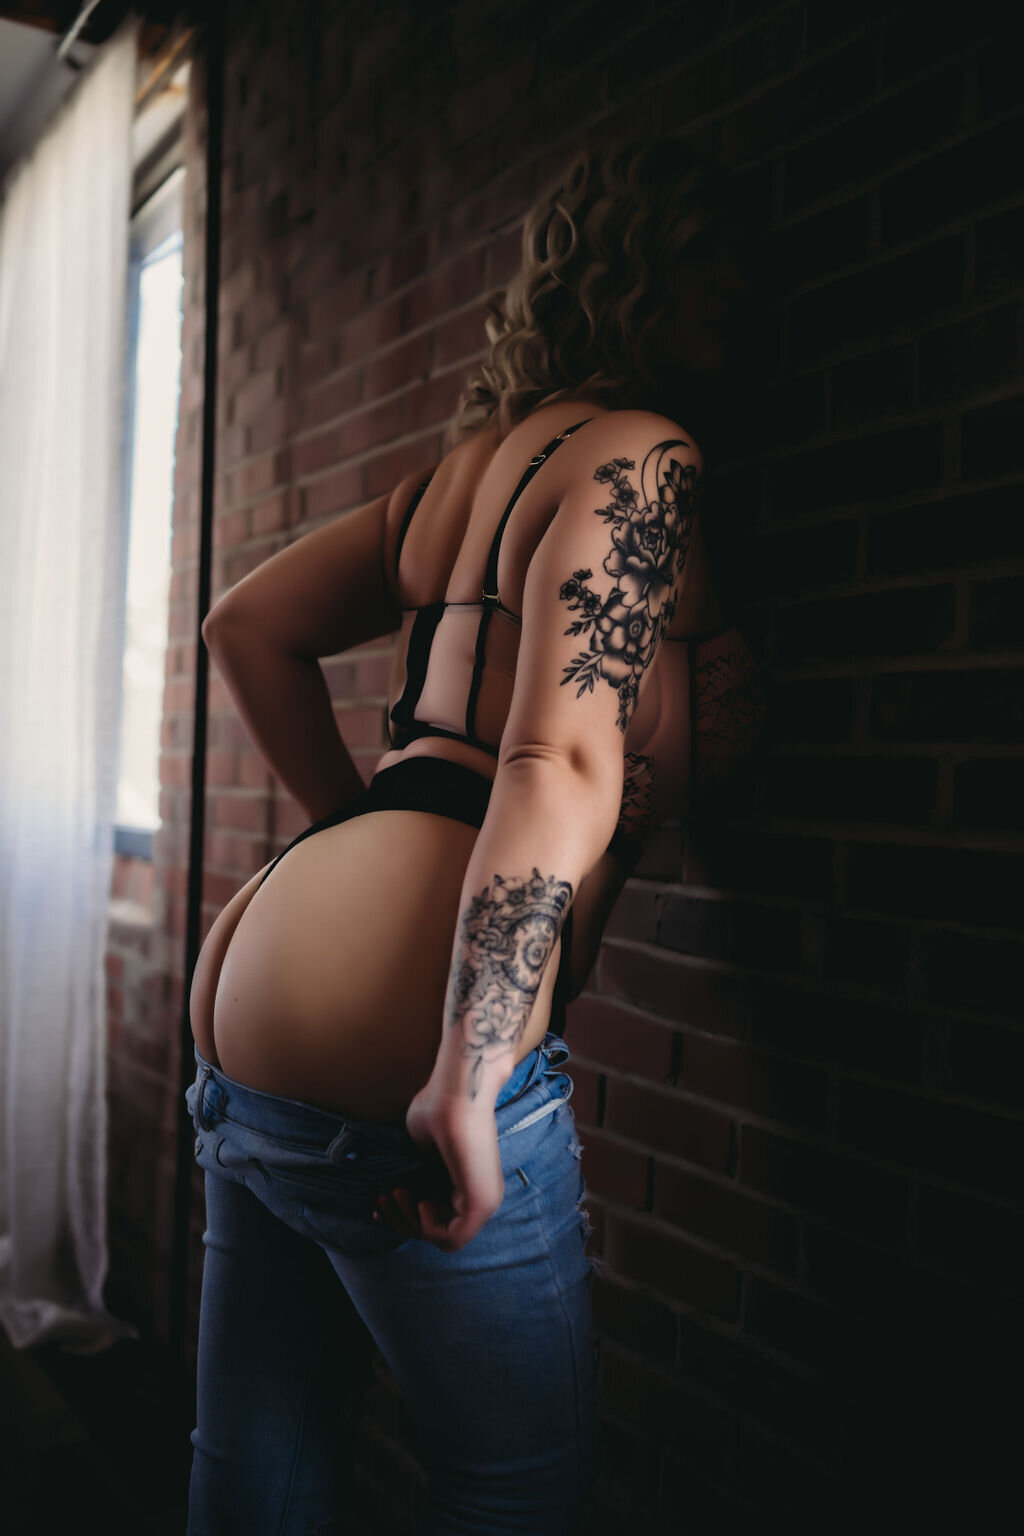 woman with tattoo on arm in black bra and jeans leaning against brick wall showing butt